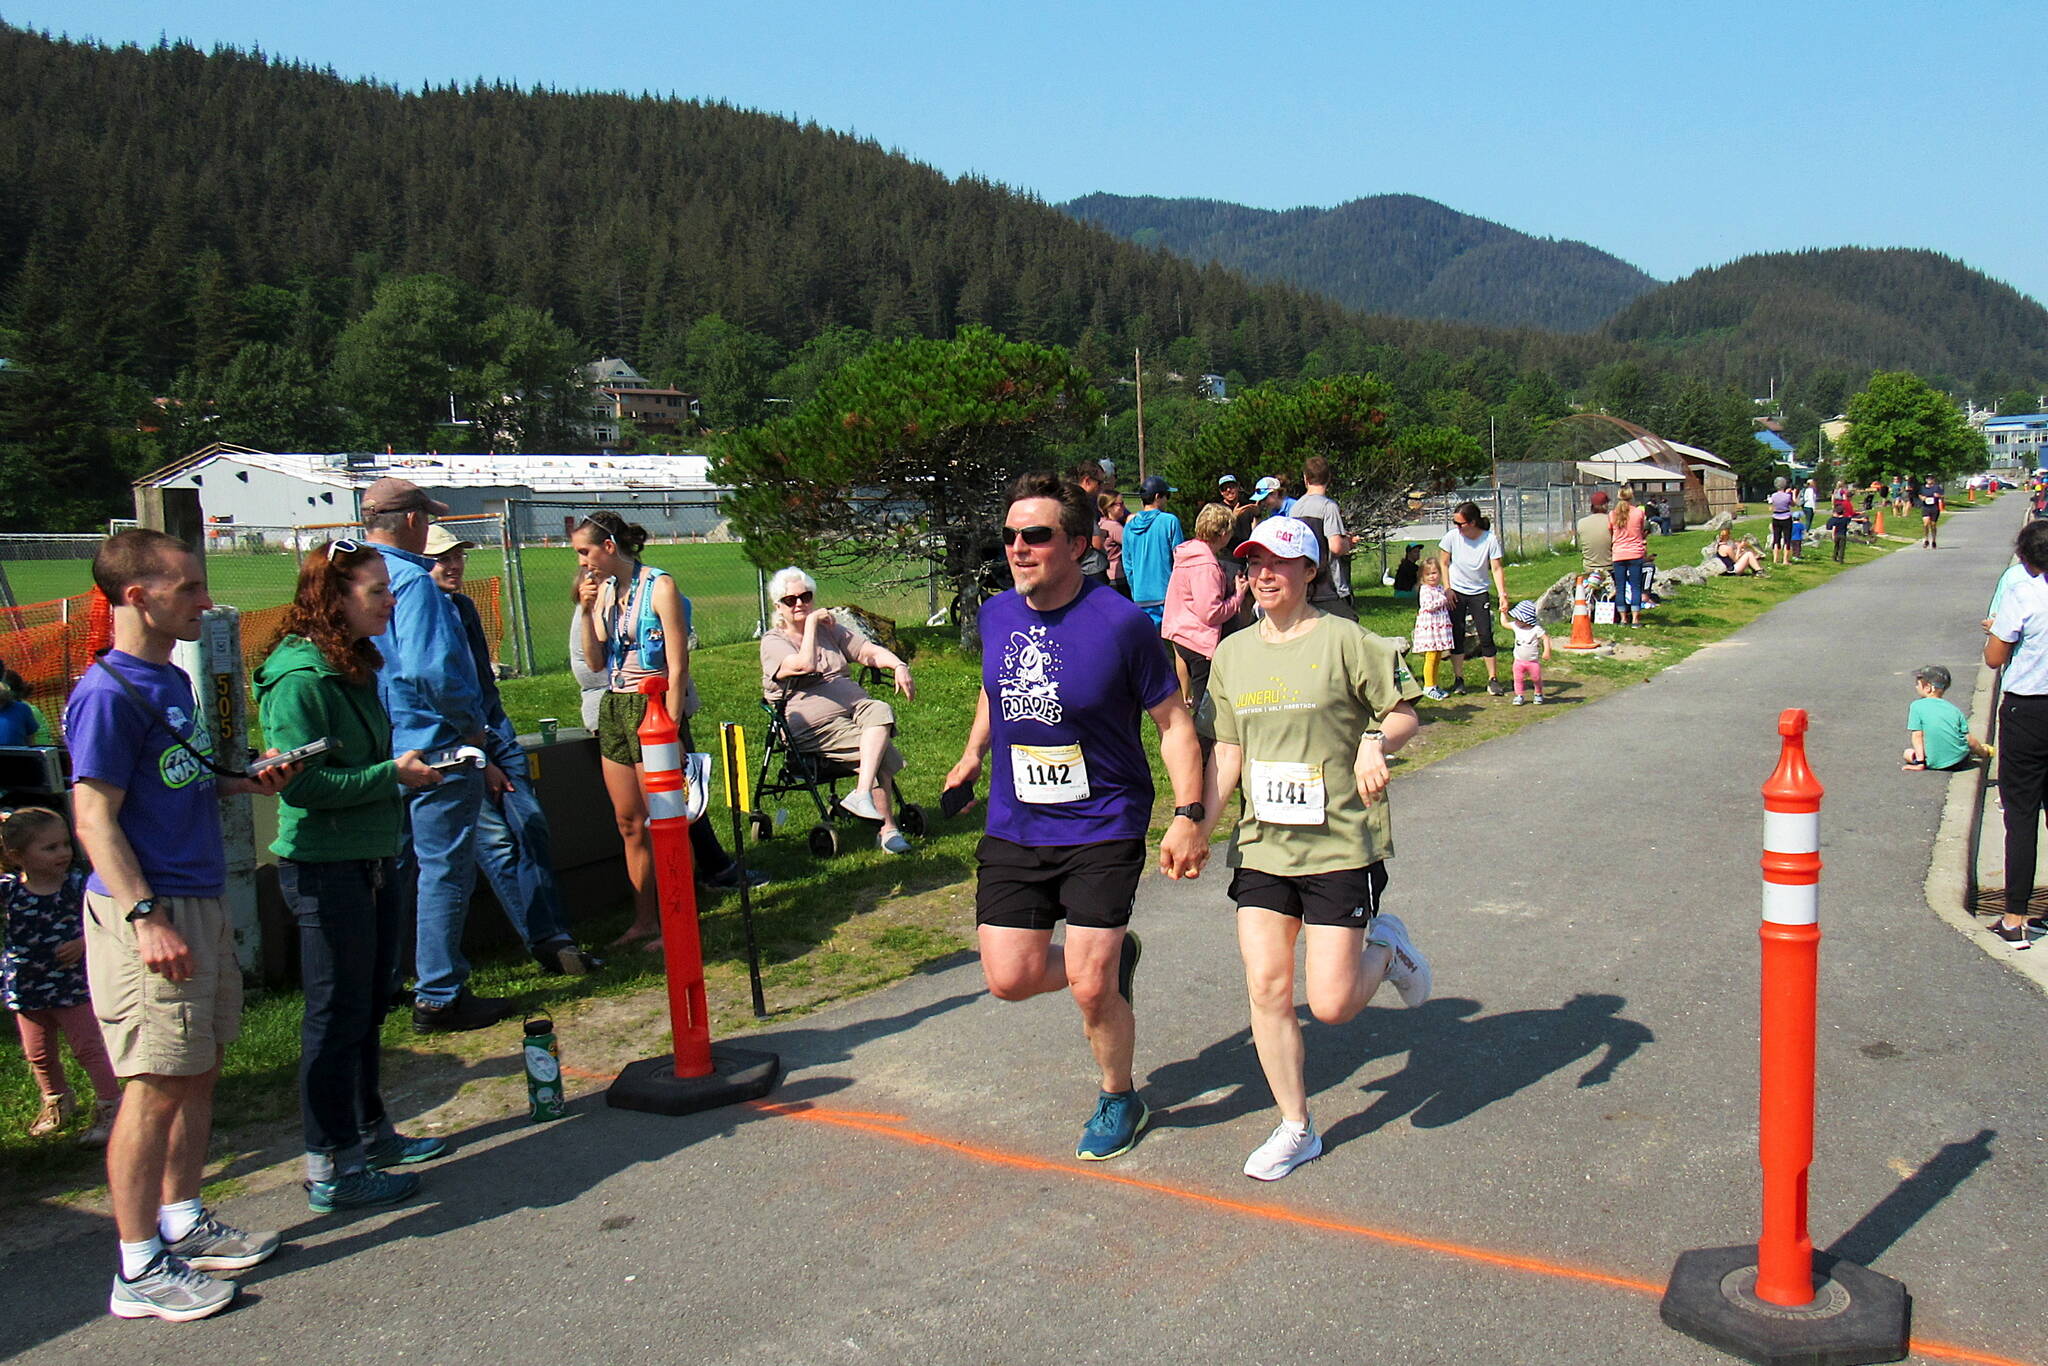 Samuel and Justine Carlisle, a couple from Asheville, North Carolina, cross the finish line of the Juneau Half Marathon on Saturday at Savikko Park. Organizers of the event, which includes full and half marathons, estimate about half of the participants are from outside Juneau because it is considered a “destination” race. (Photo courtesy of Juneau Trail and Road Runners)